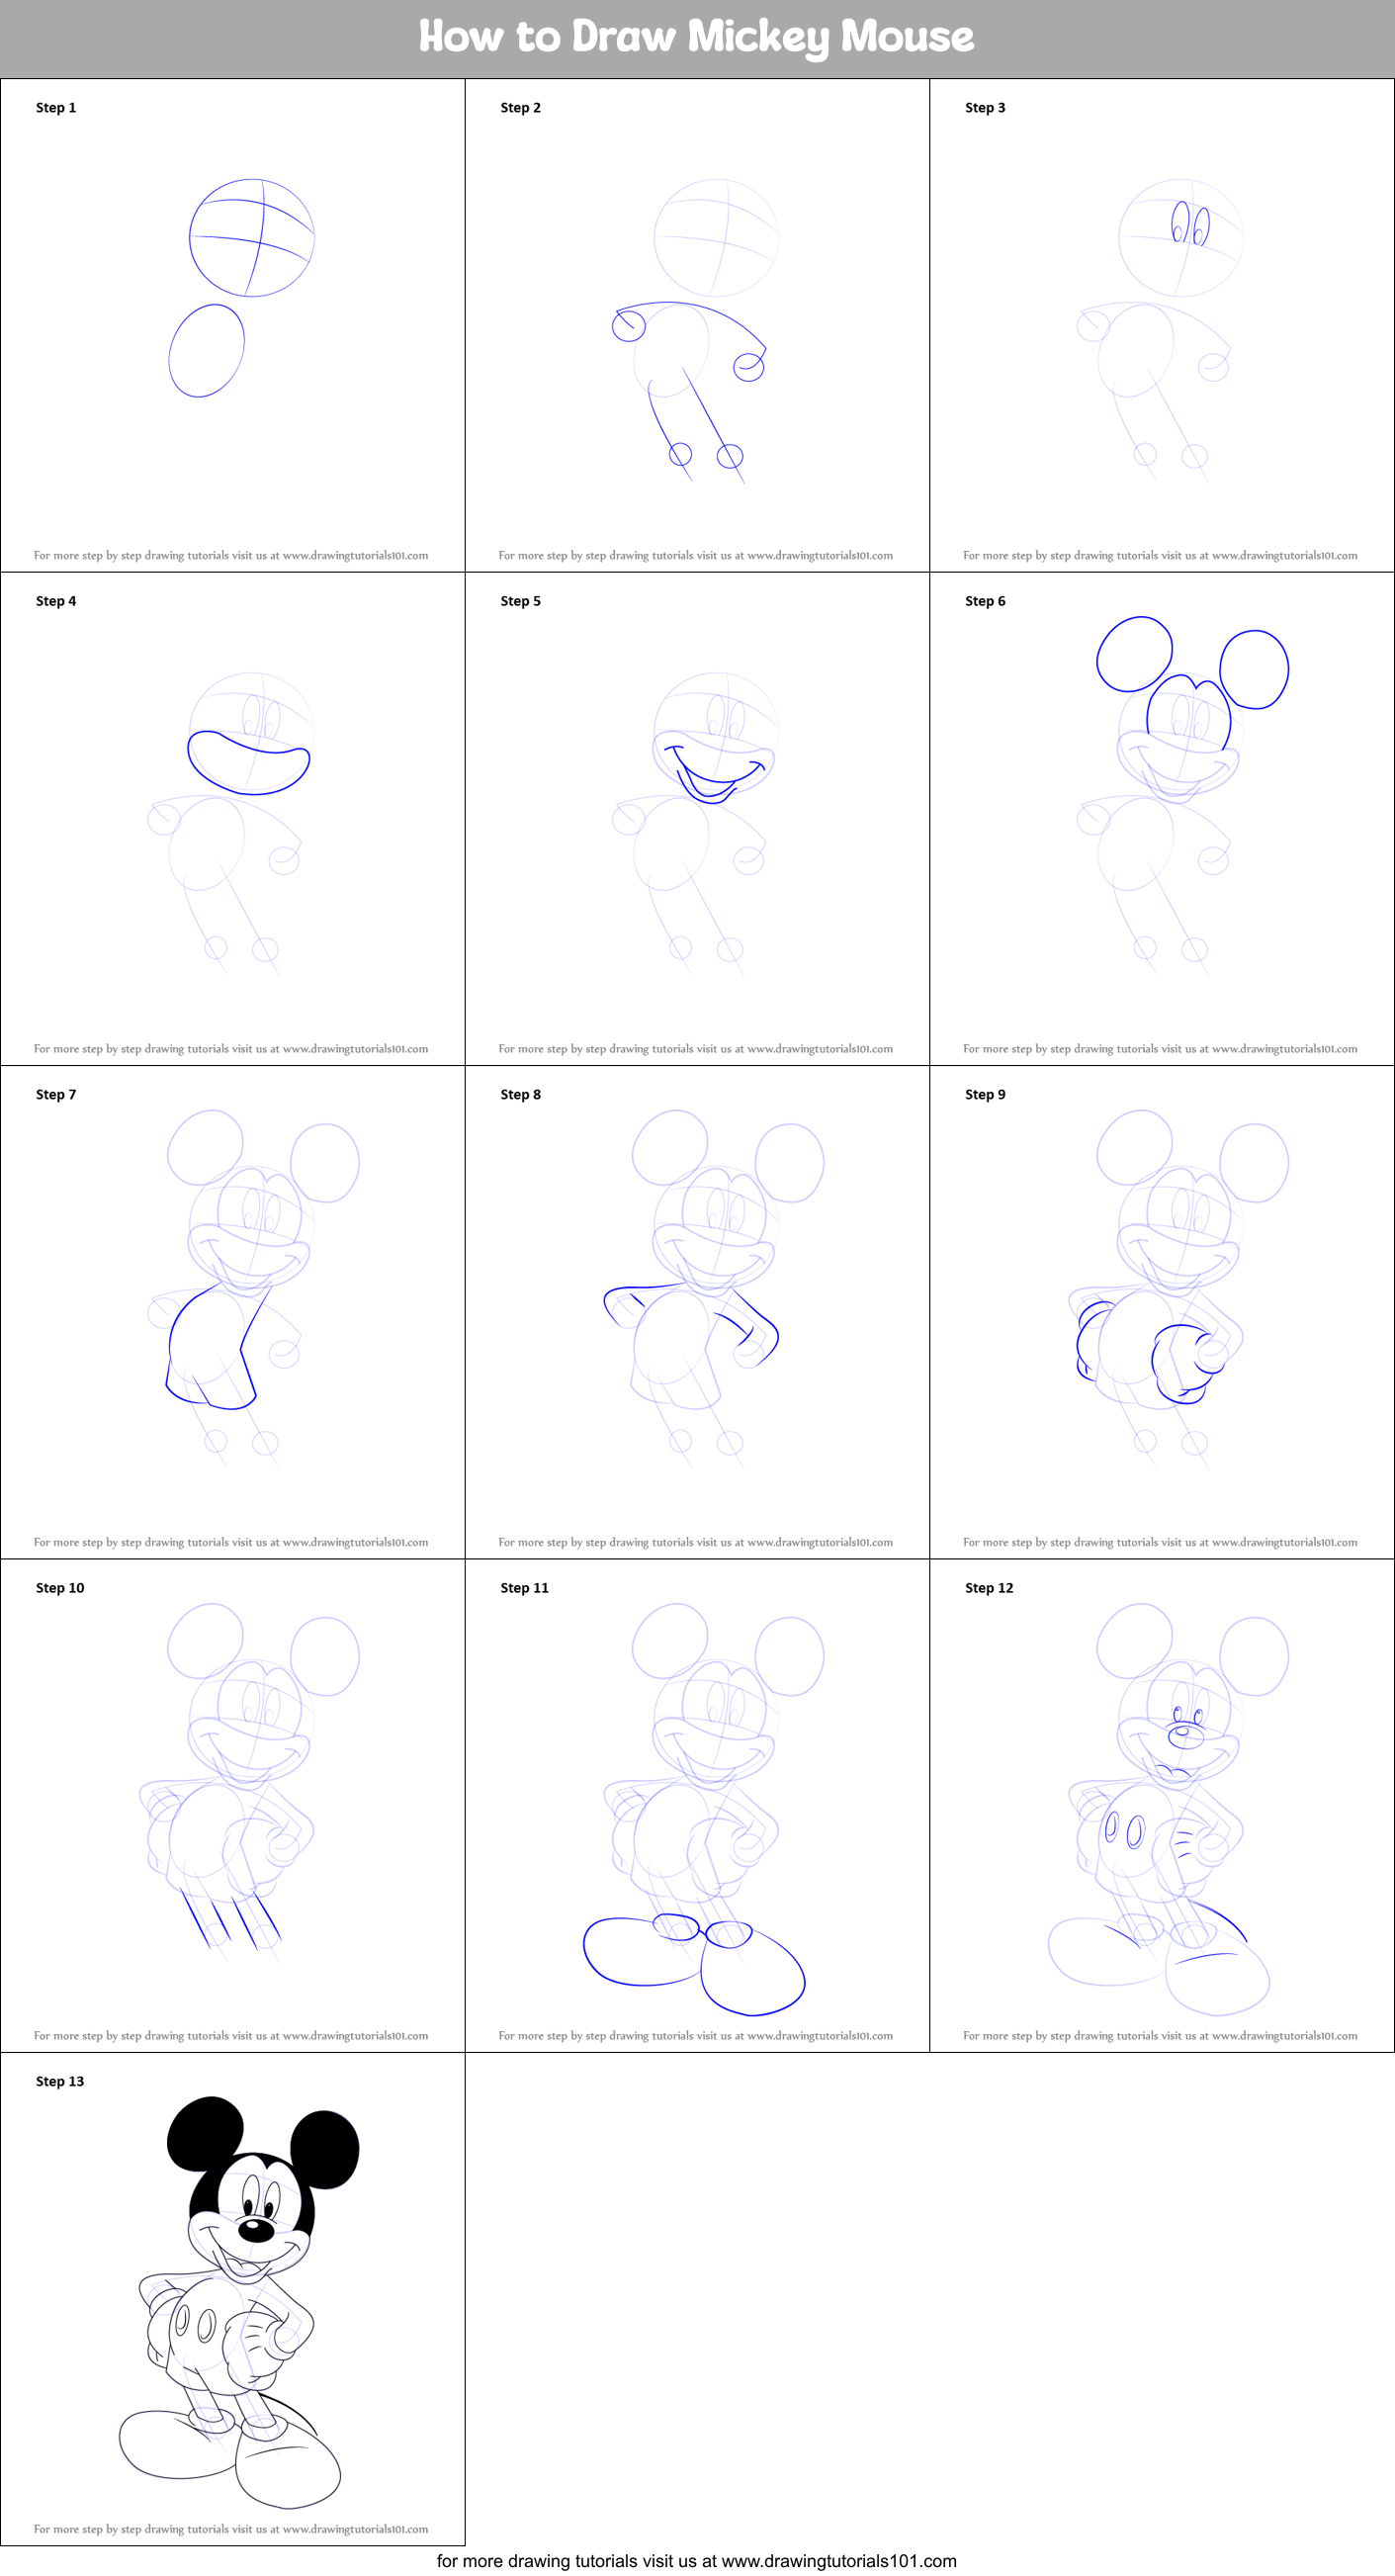 How to Draw Mickey Mouse printable step by step drawing sheet